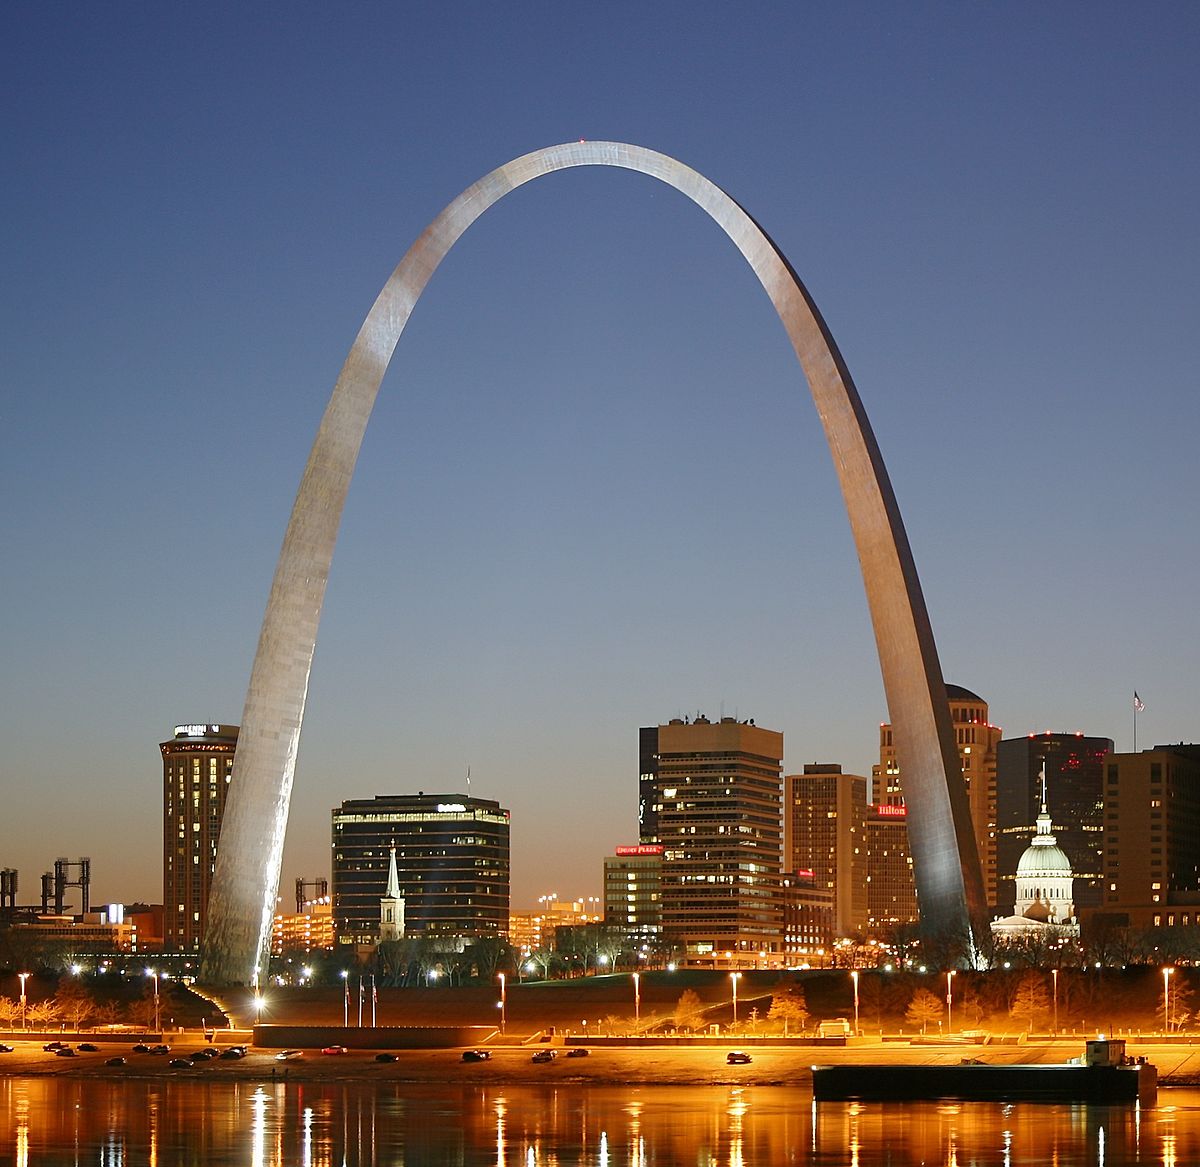 1200px-St_Louis_night_expblend_cropped